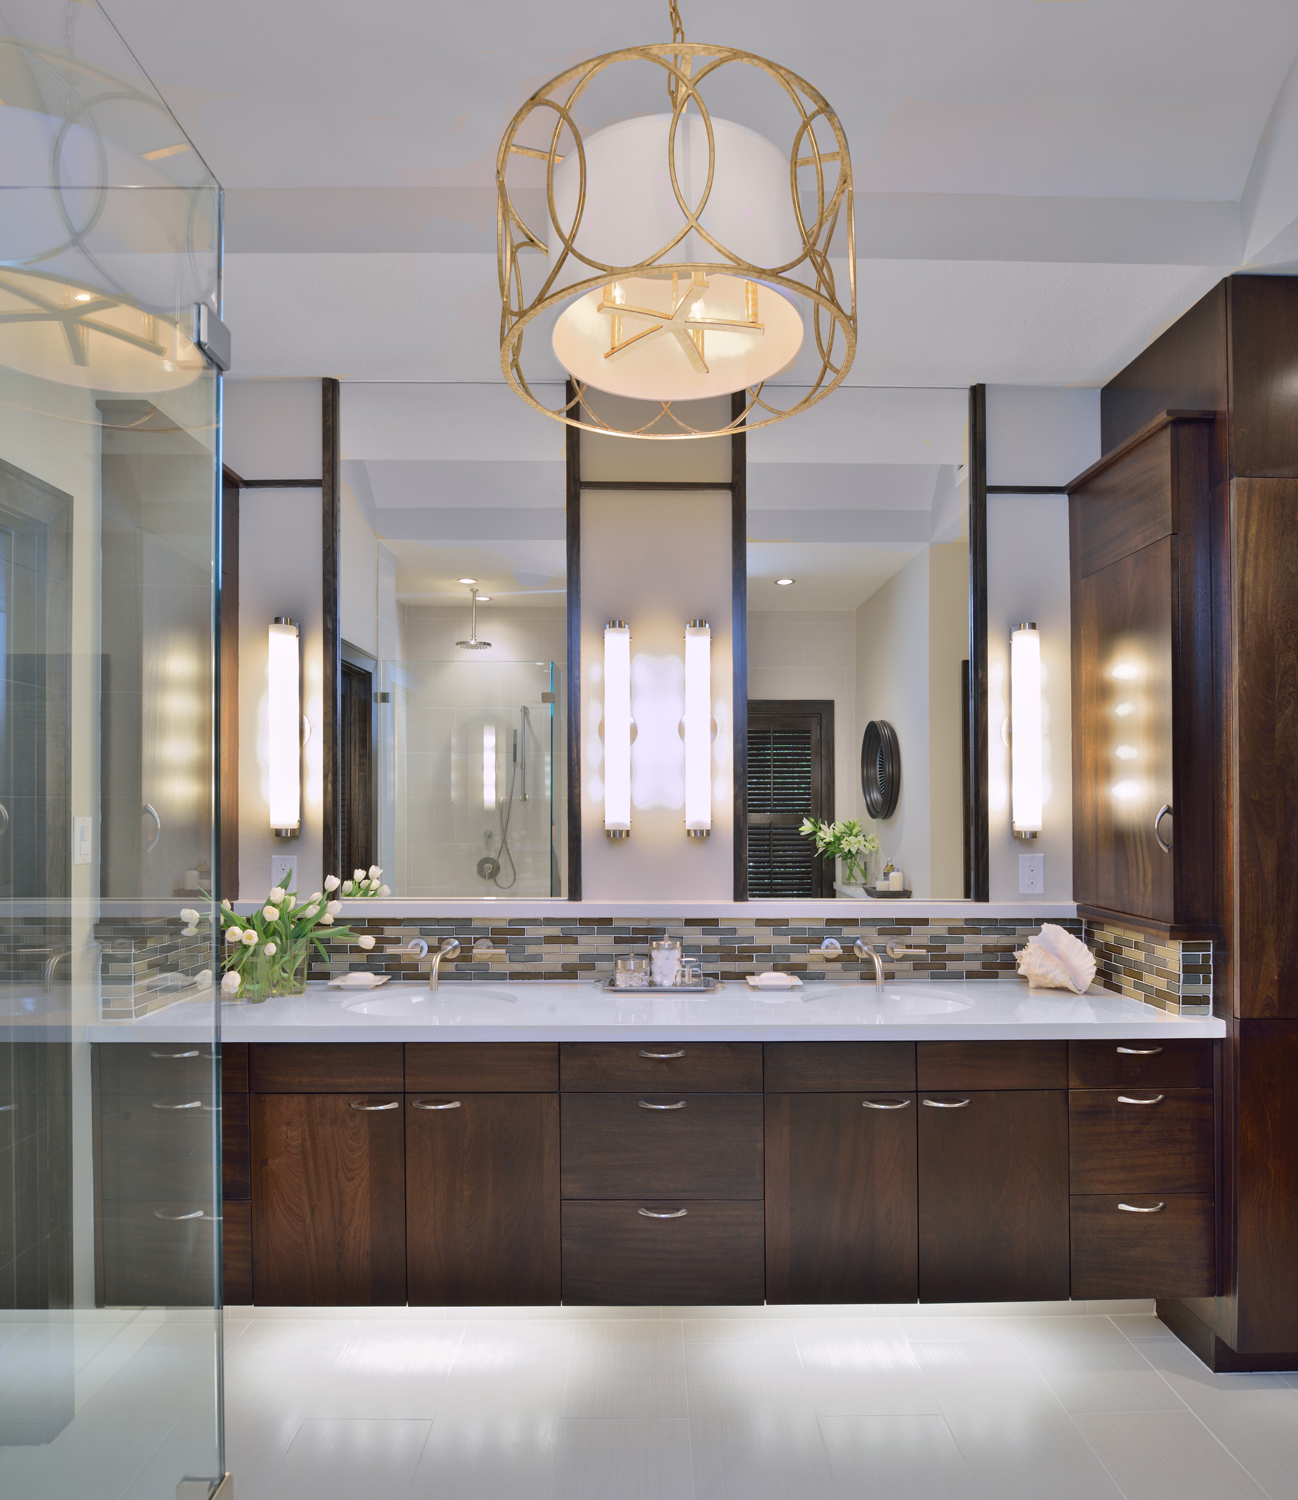 Tall Mirrors Will Make Your Bathroom Grow & Glow | Here's How... — DESIGNED